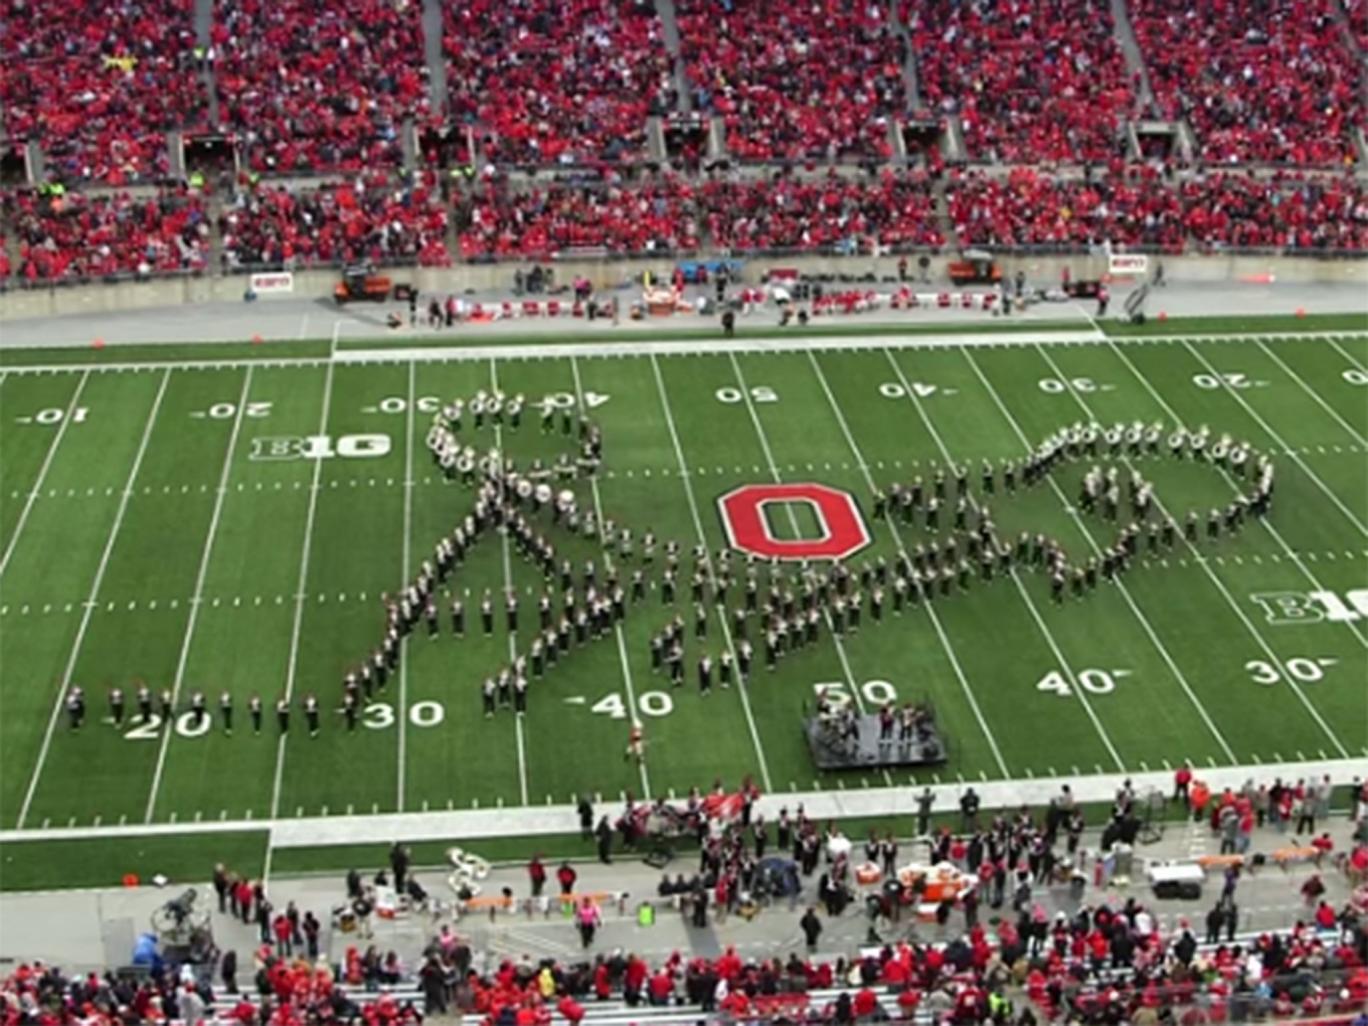 Rock Band Logos Collage Video Ohio State University Marching